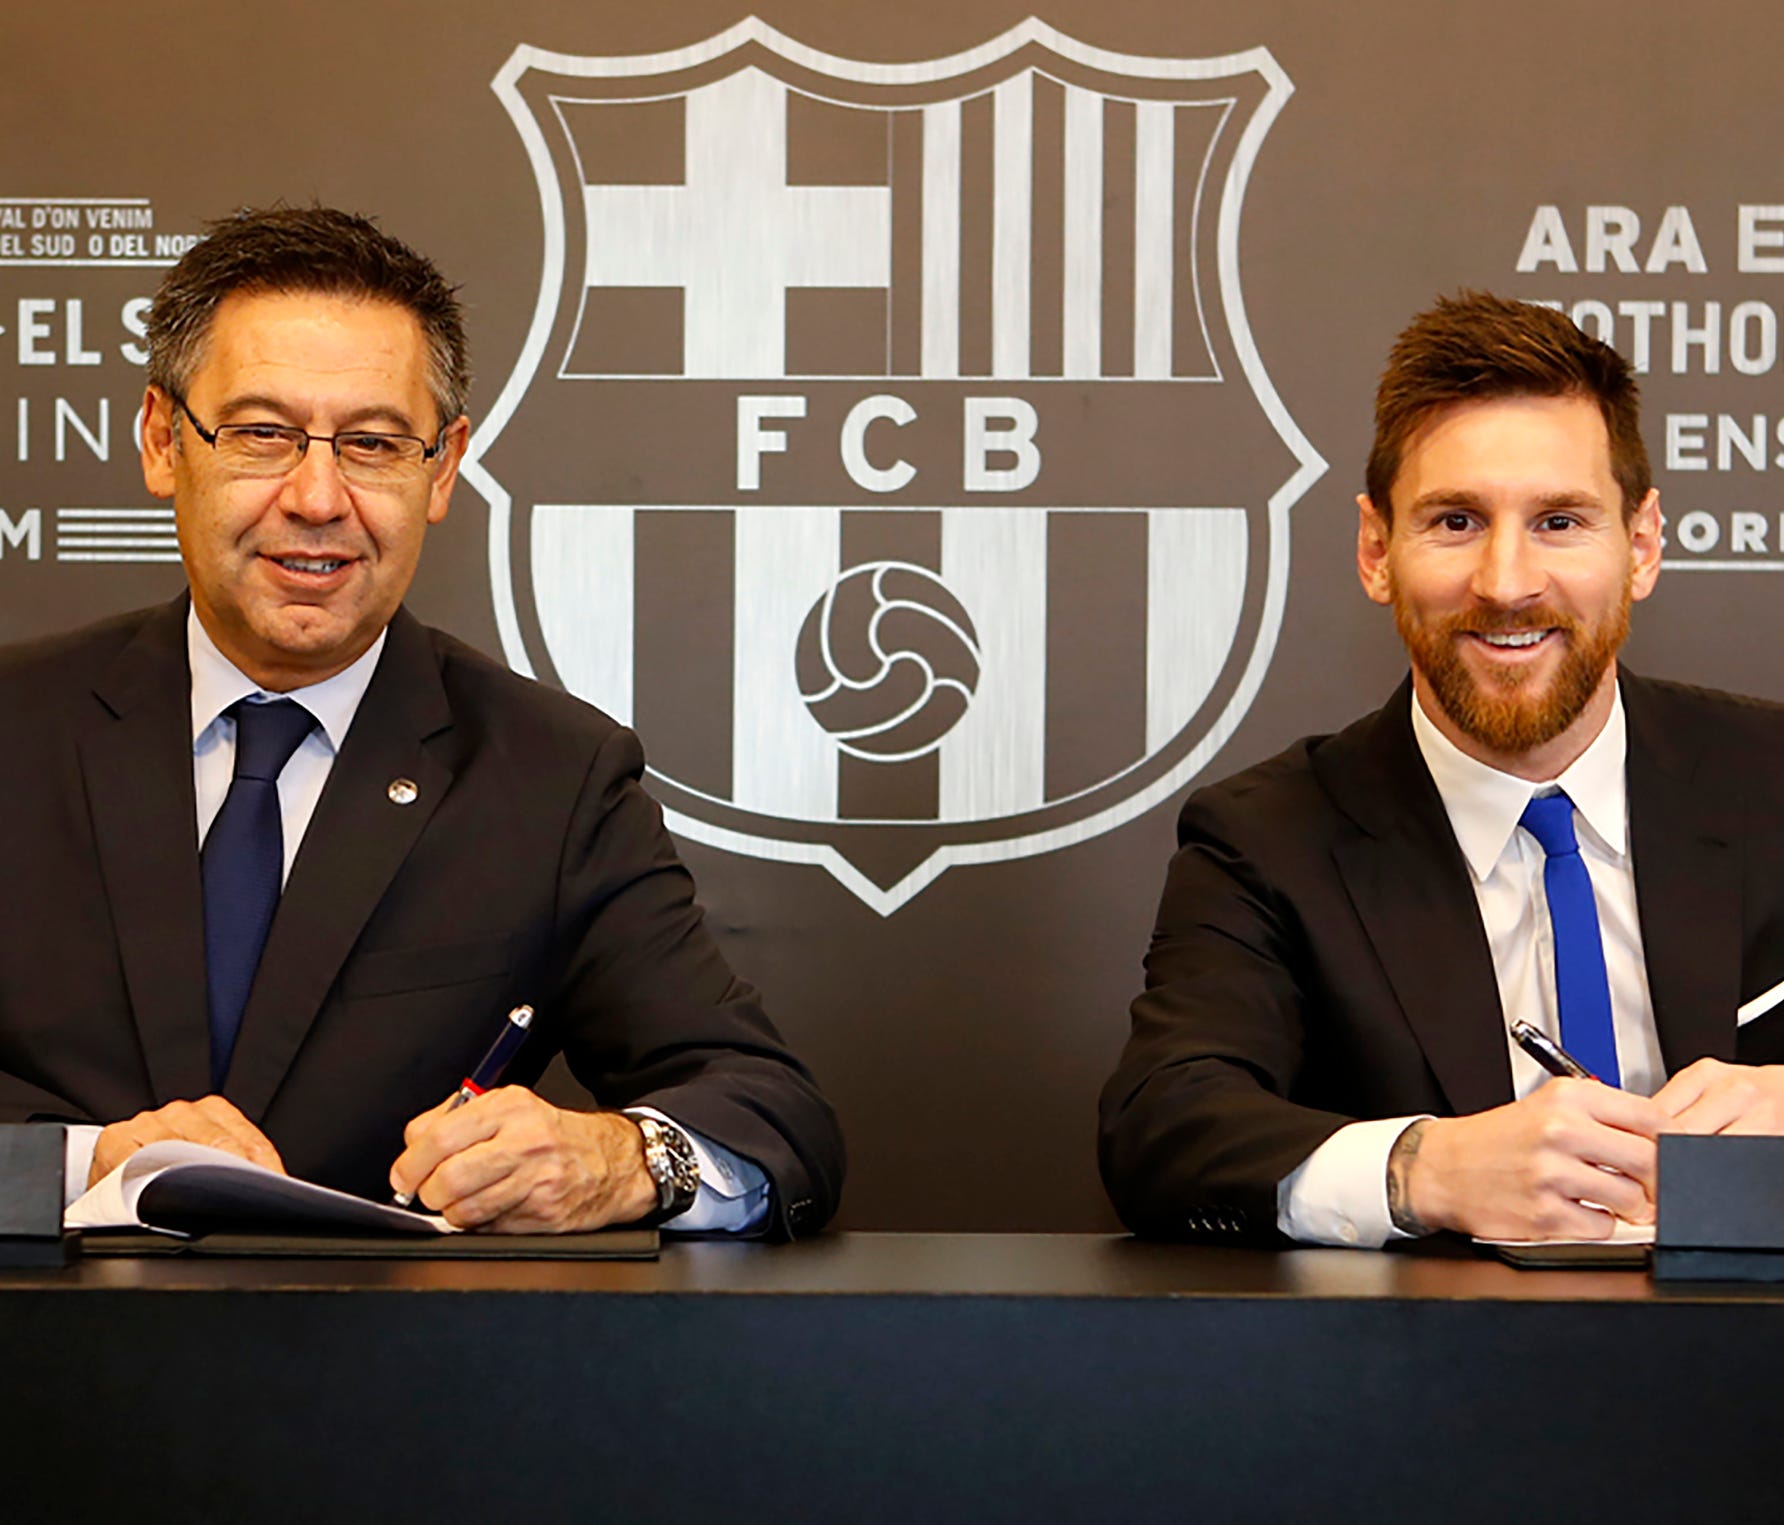 Lionel Messi signed a contract that will keep him with Barcelona through 2021.